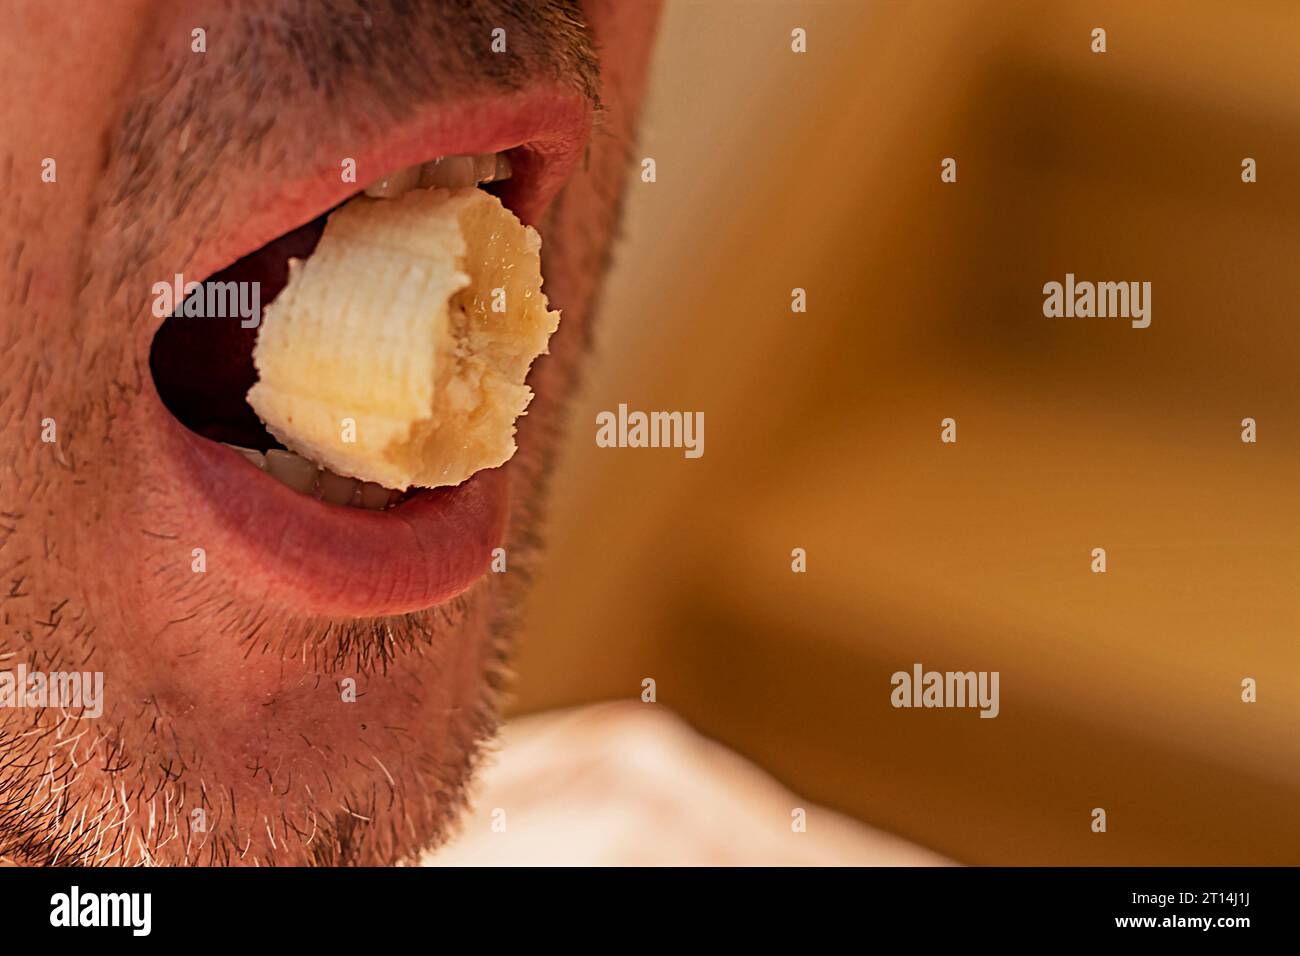 piece of banana in a man's mouth Stock Photo